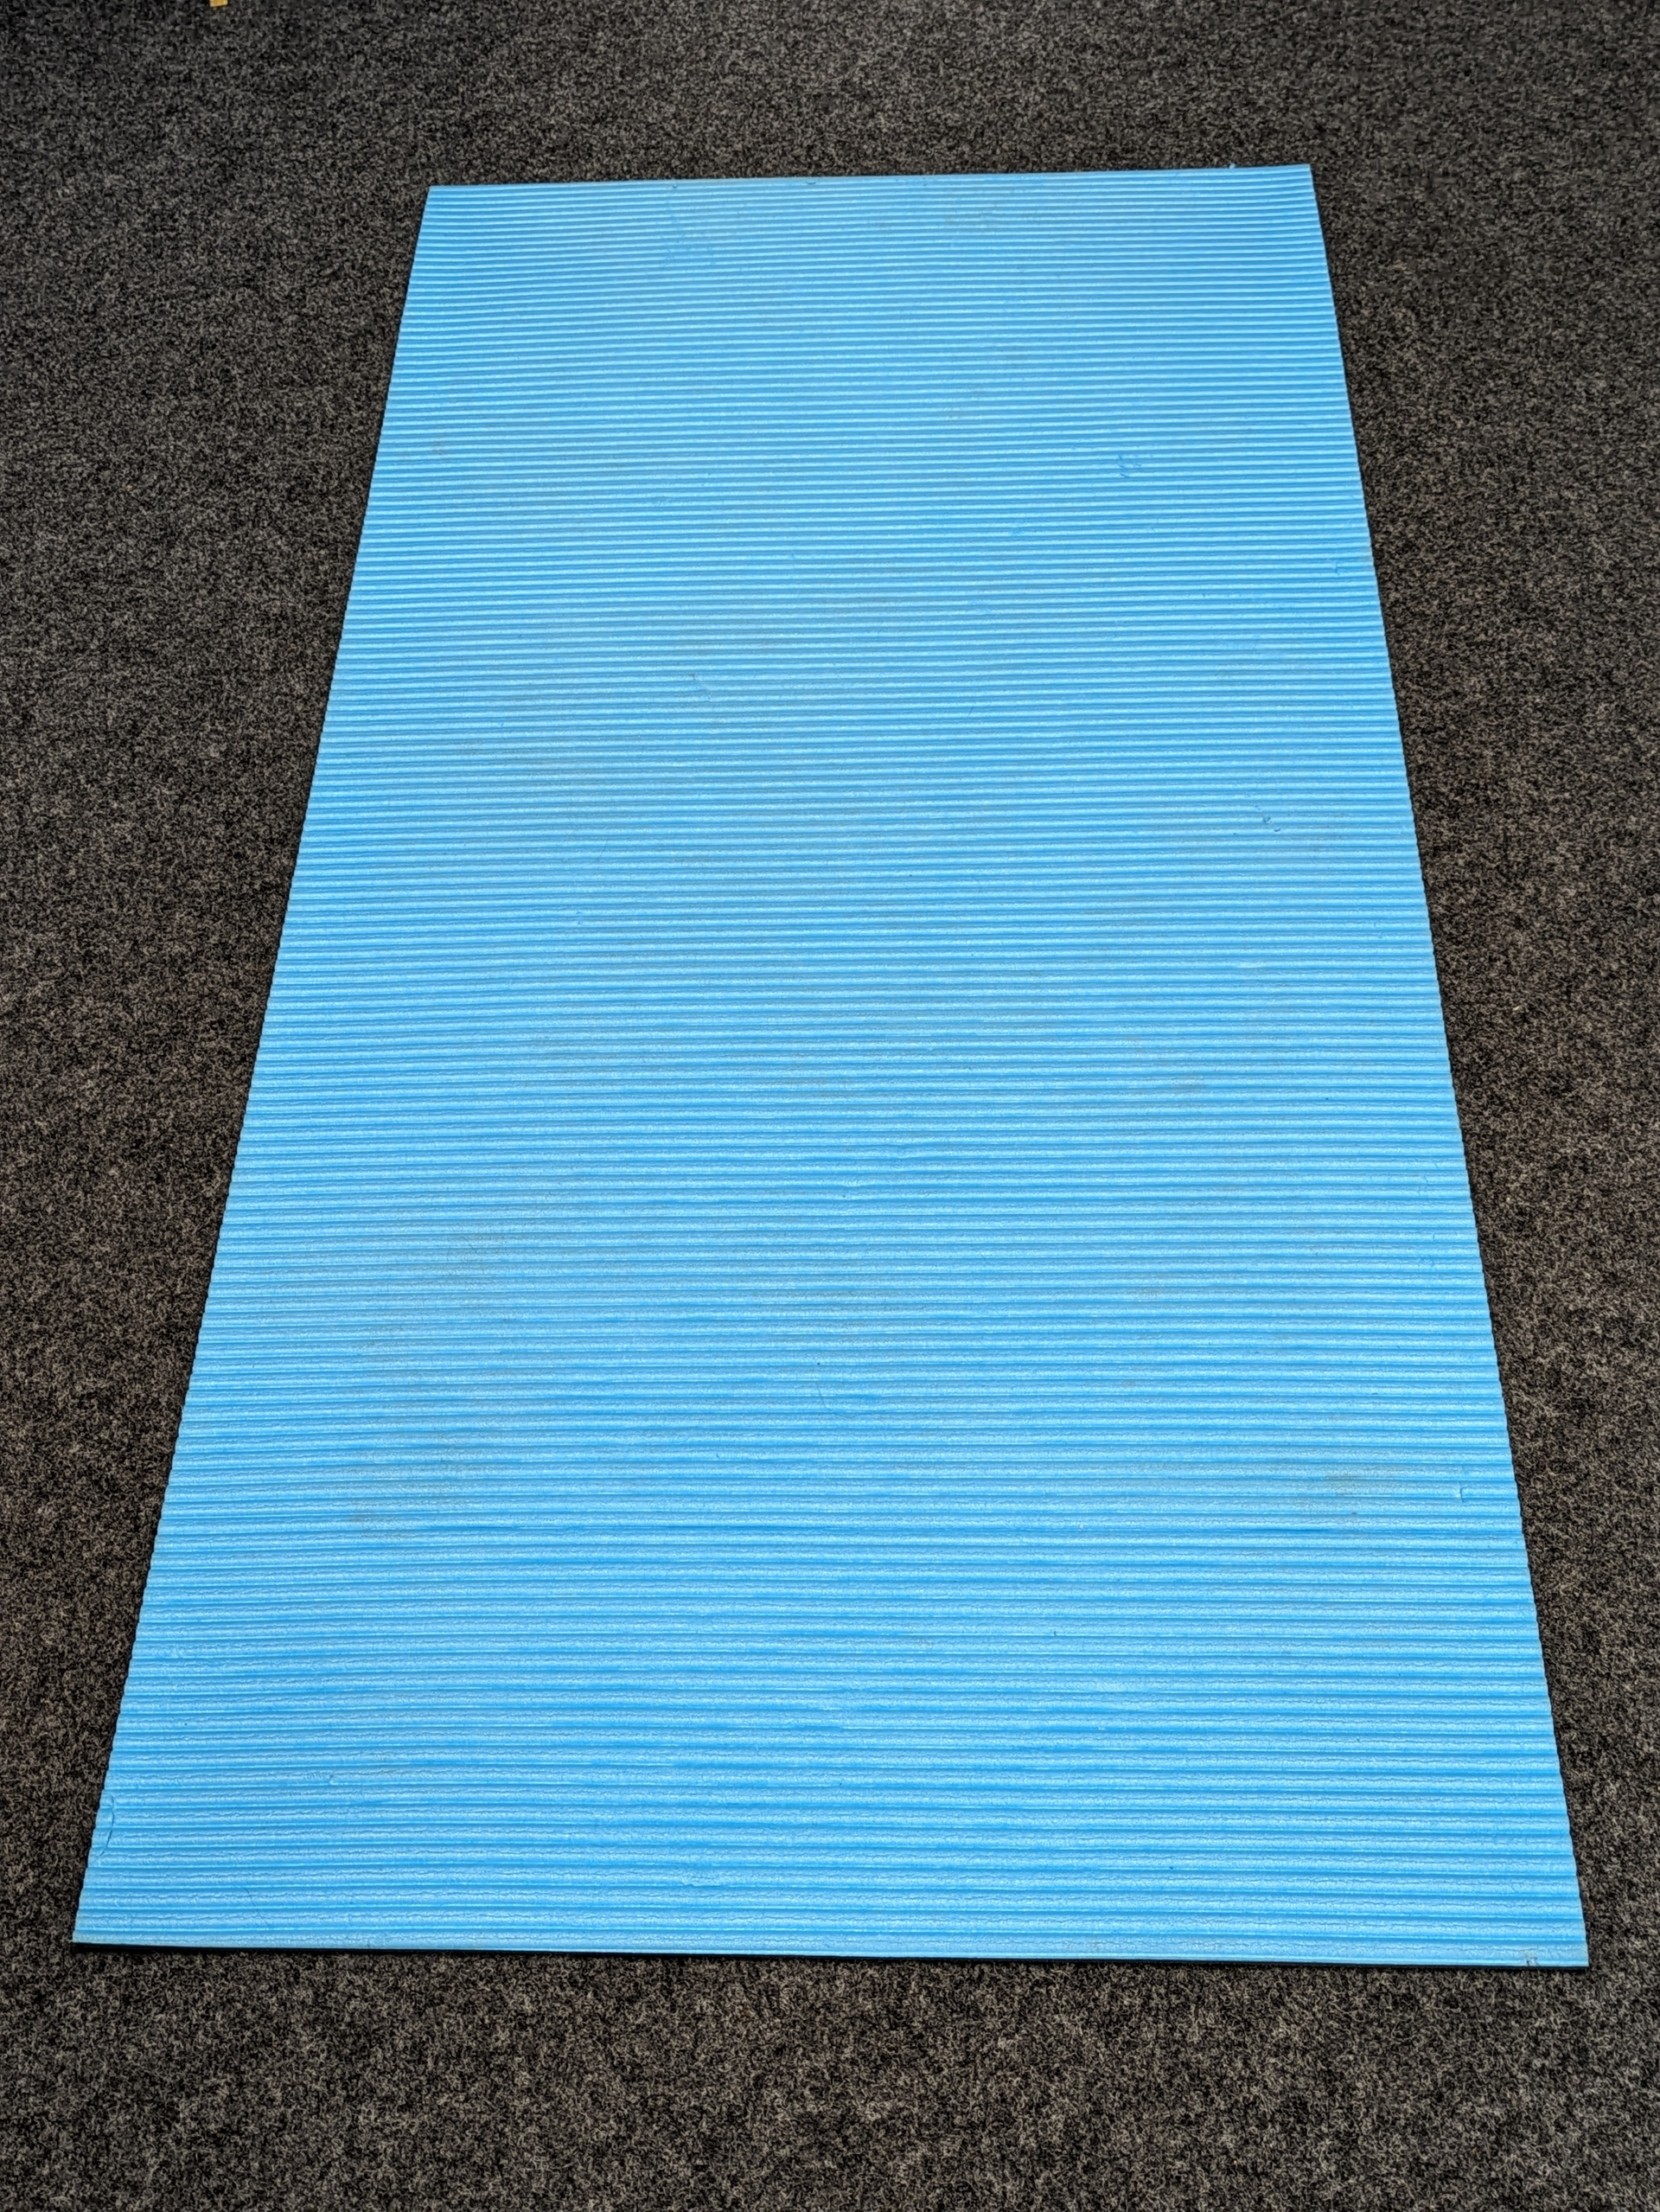 photo of blue yoga mat spread out on the floor